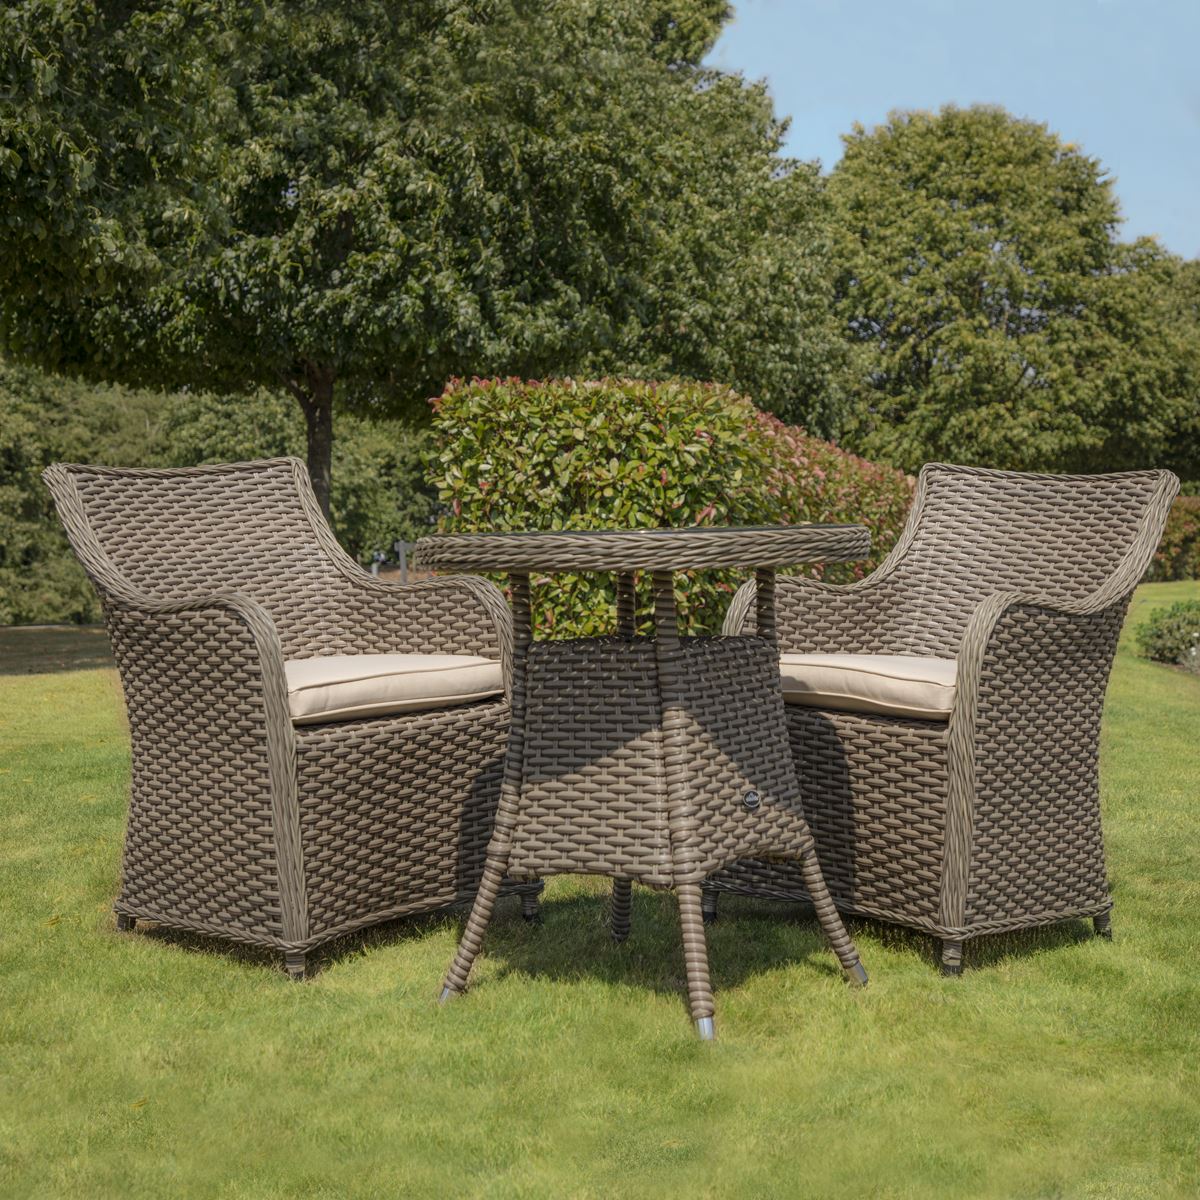 Dellonda Chester 3 Piece Rattan Wicker Outdoor Dining Set with Tempered Glass Table Top, Brown